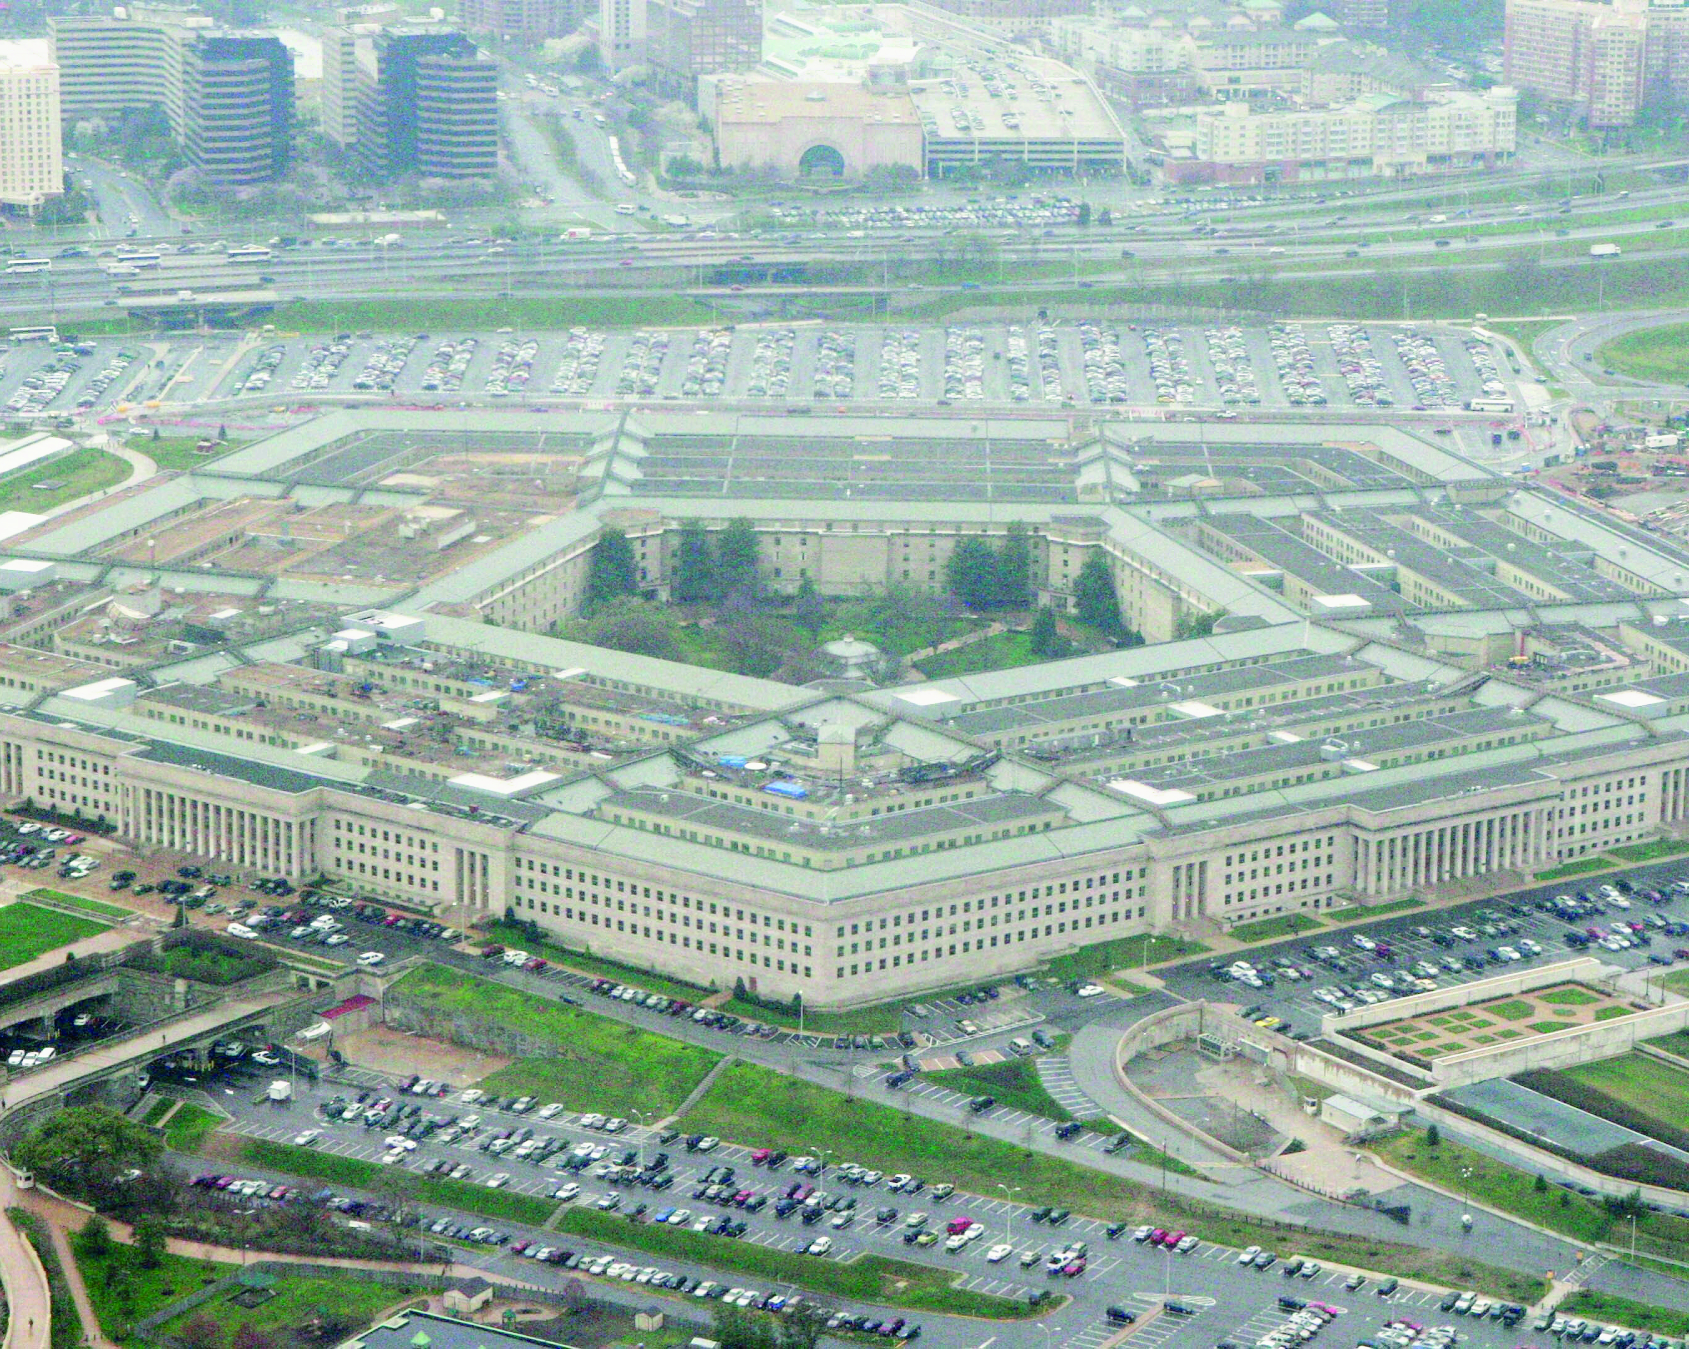 FILE - This March 27, 2008, aerial file photo, shows the Pentagon in Washington. Amazon is protesting the Pentagon‚Äôs decision to award a huge cloud-computing contract to Microsoft, citing ‚Äúunmistakable bias‚Äù in the decision. Amazon‚Äôs competitive bid for the ‚Äúwar cloud‚Äù drew criticism from President Donald Trump and its business rivals. ((AP Photo/Charles Dharapak, File)
ArcInfo